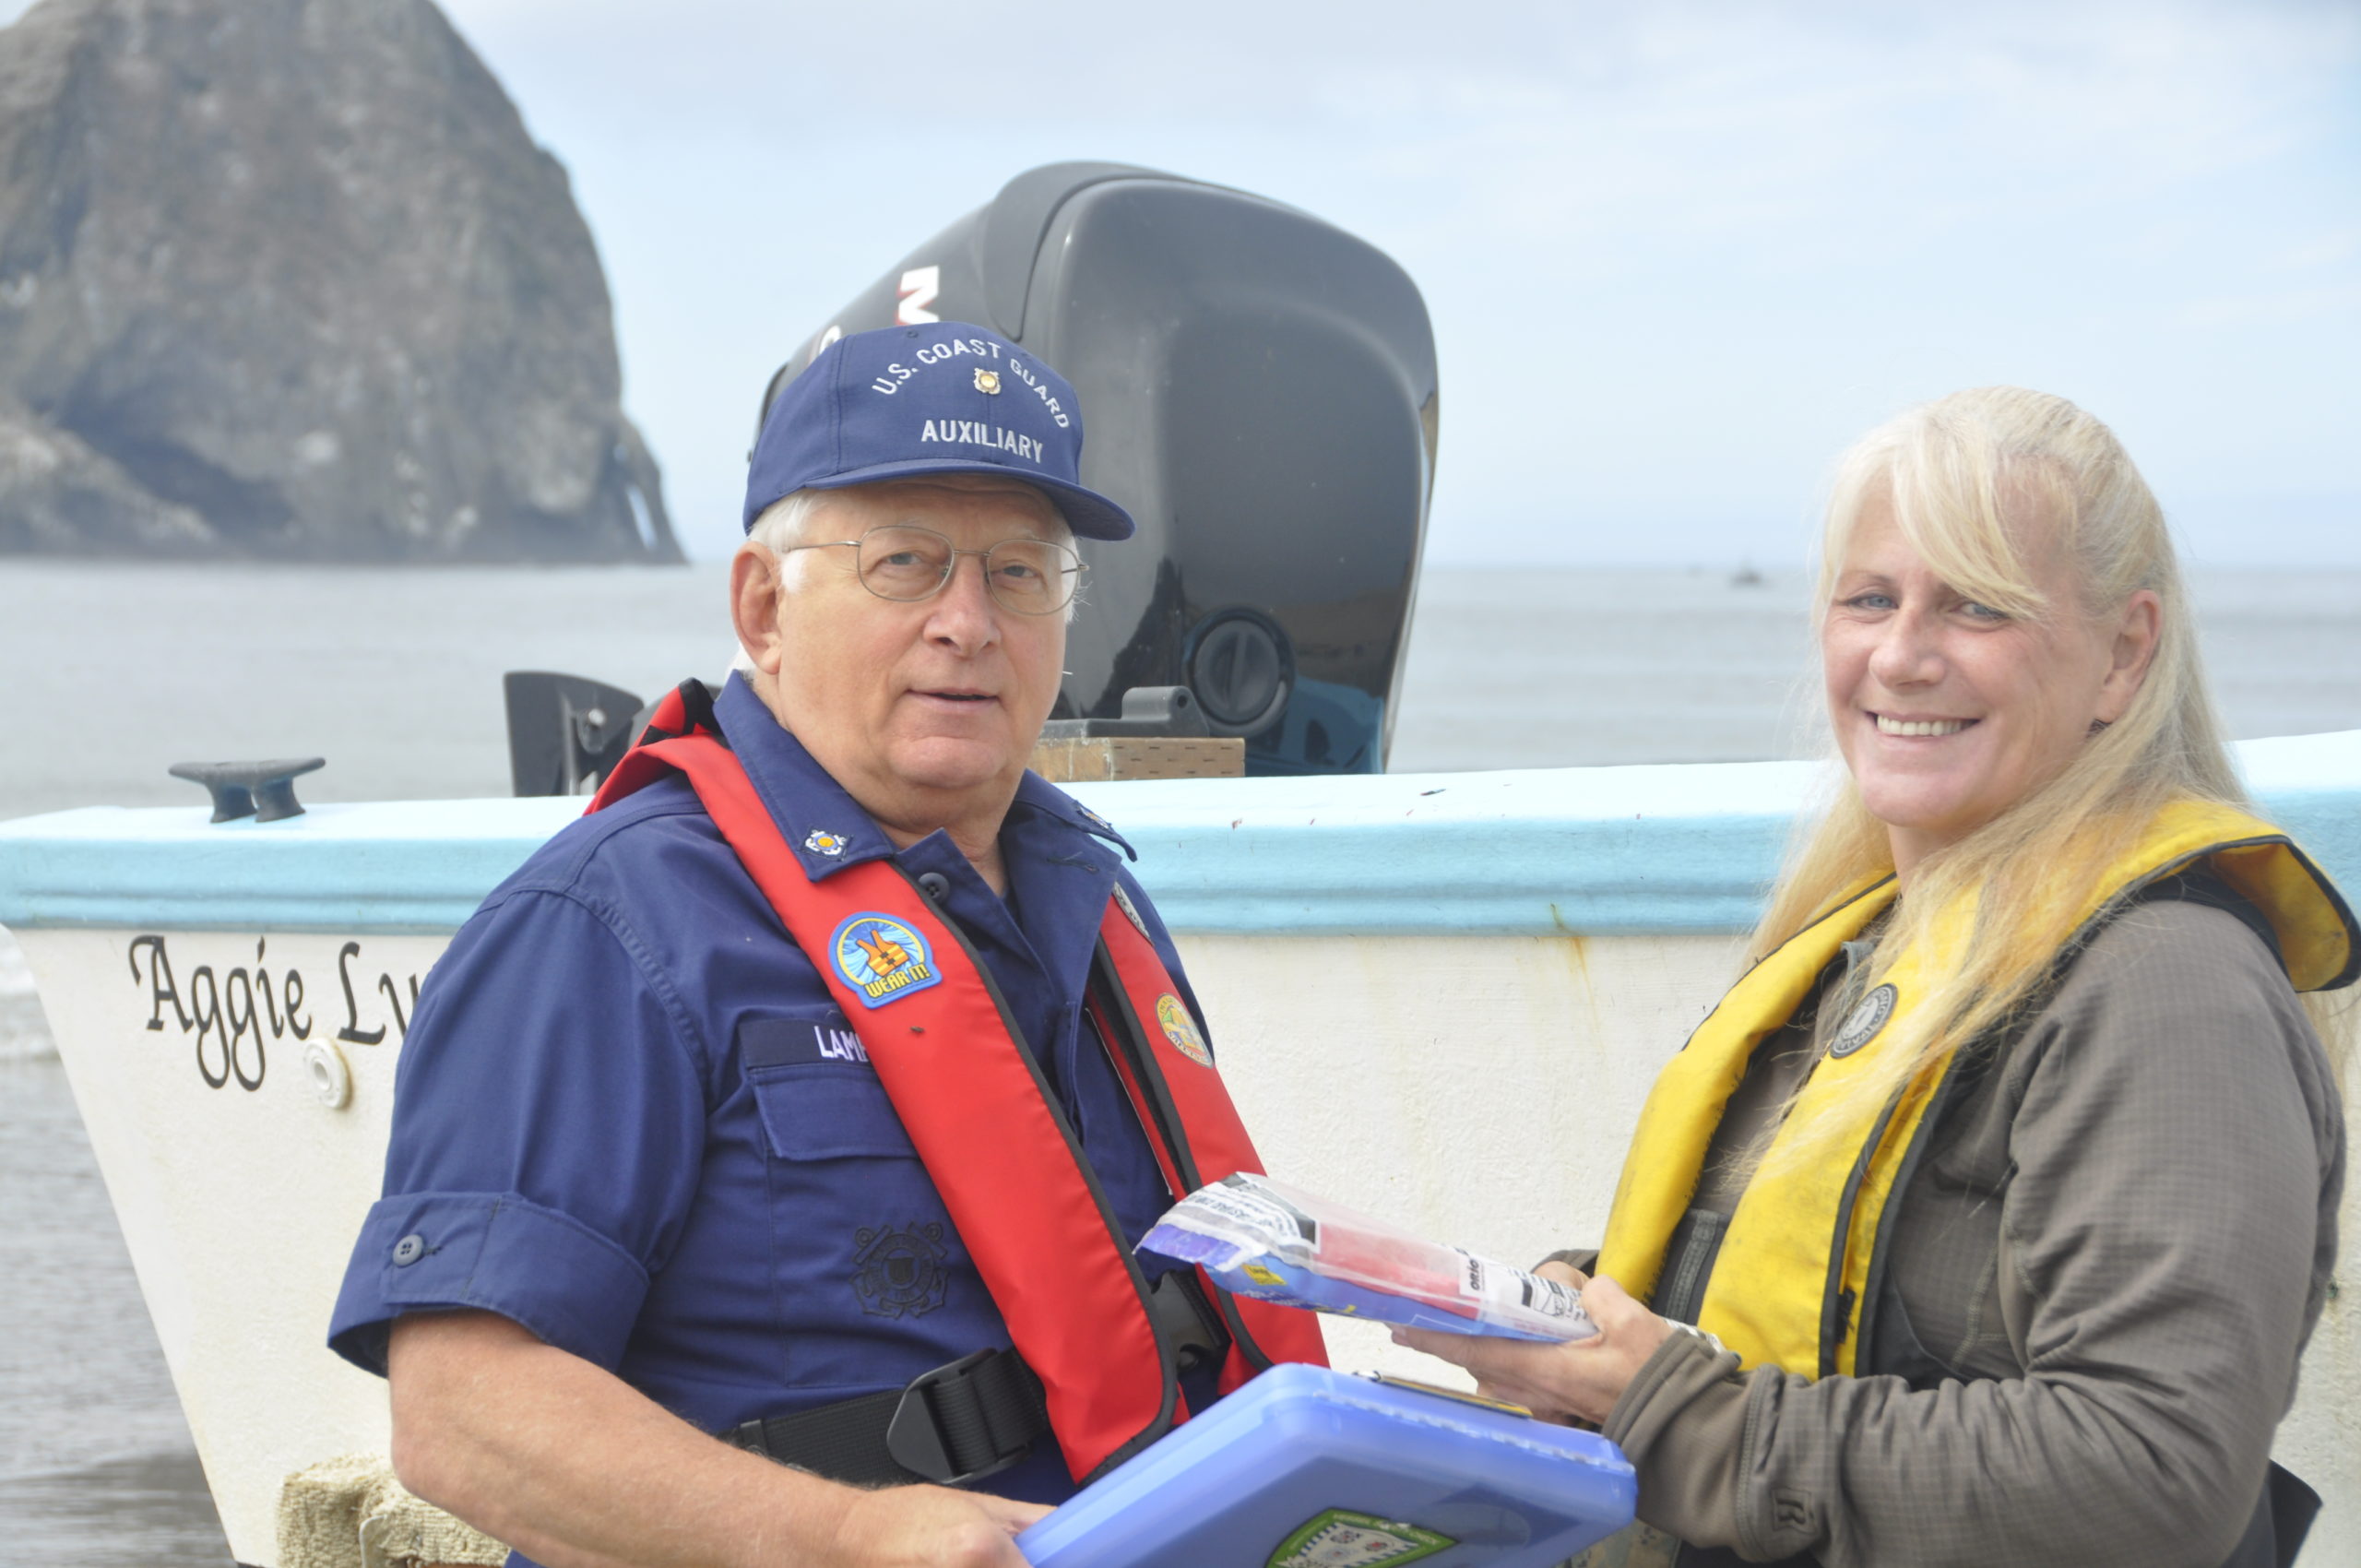 Coast Guard boat safety inspections